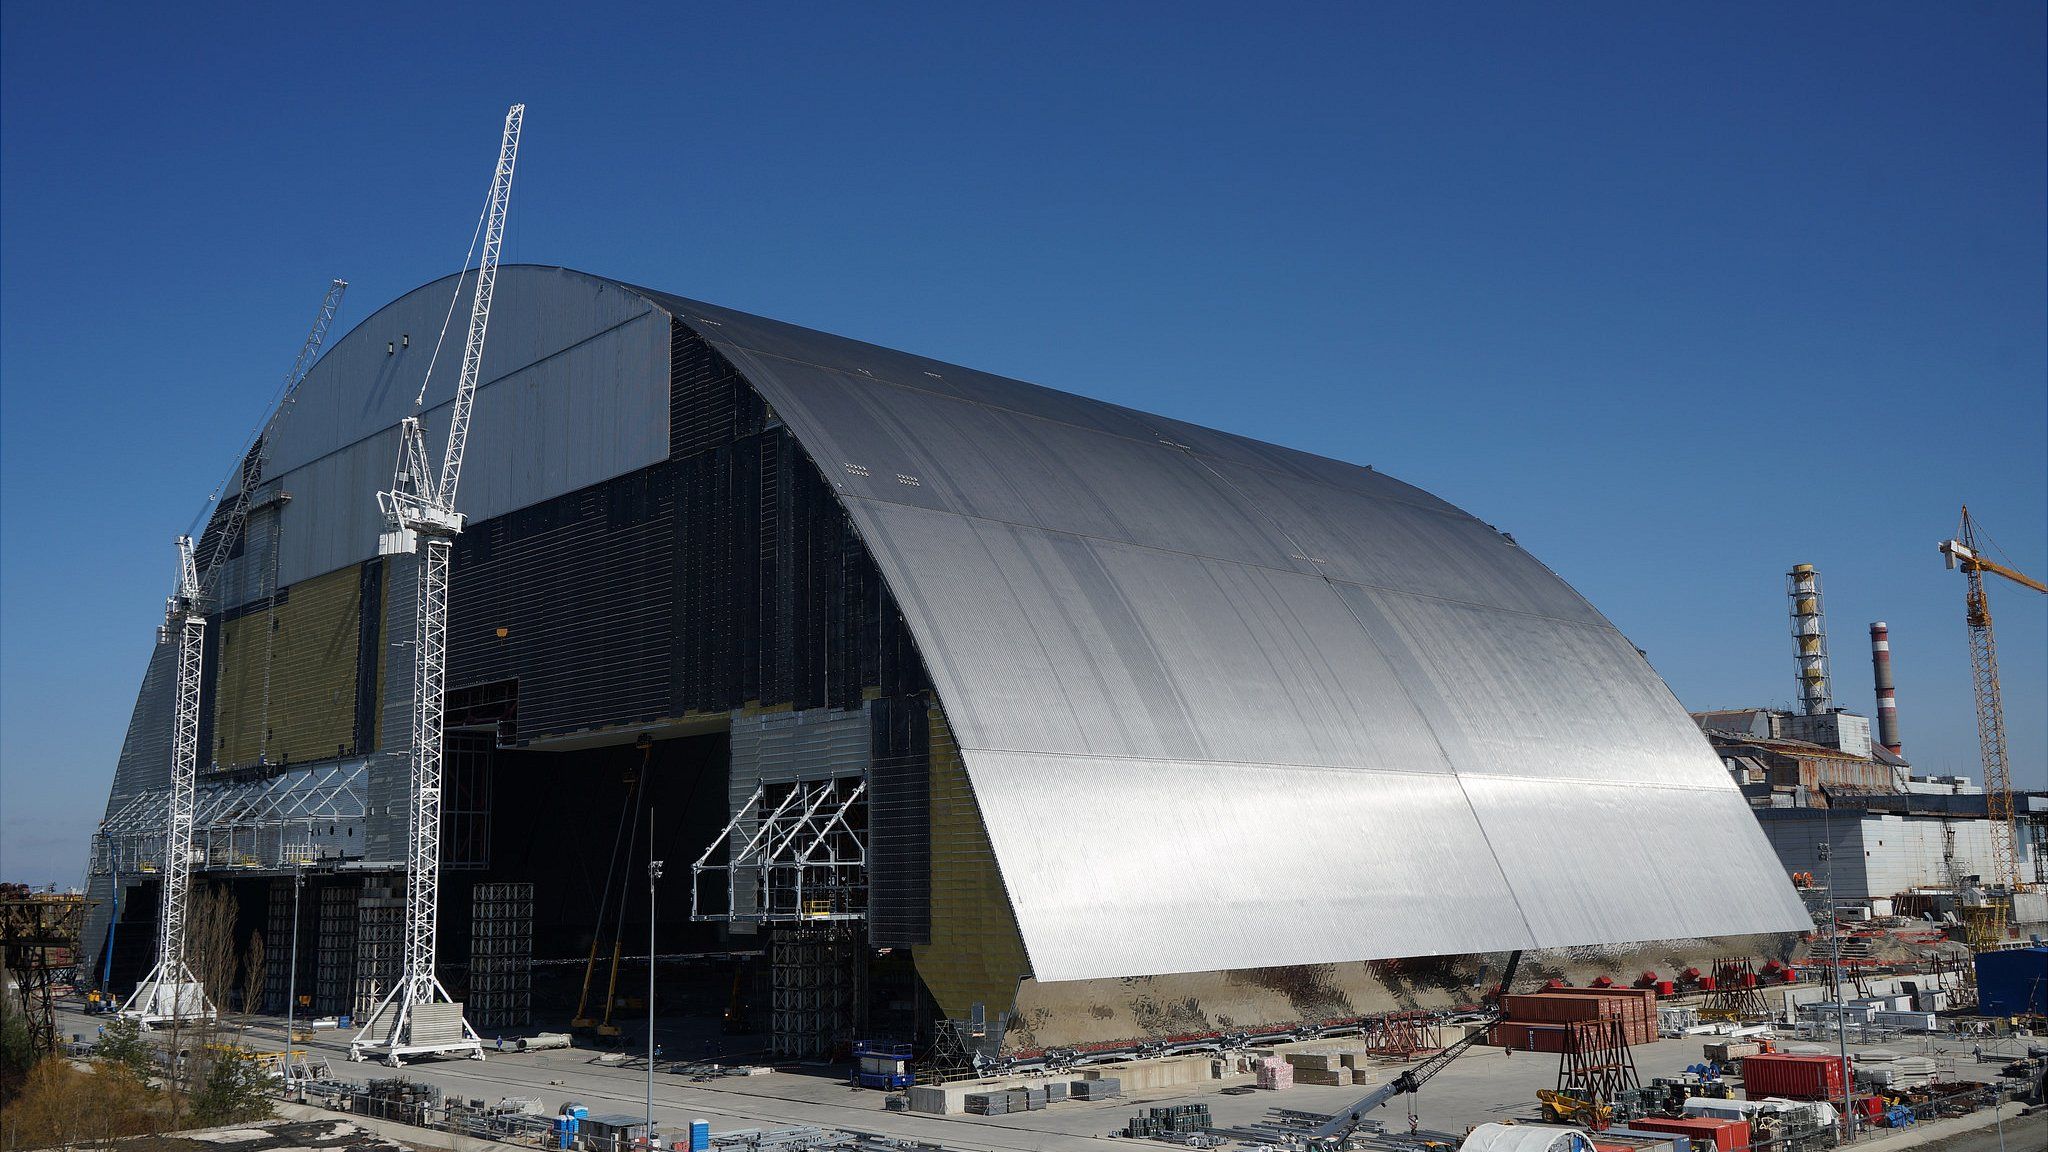 The giant shield which will eventually cover the Chernobyl reactor